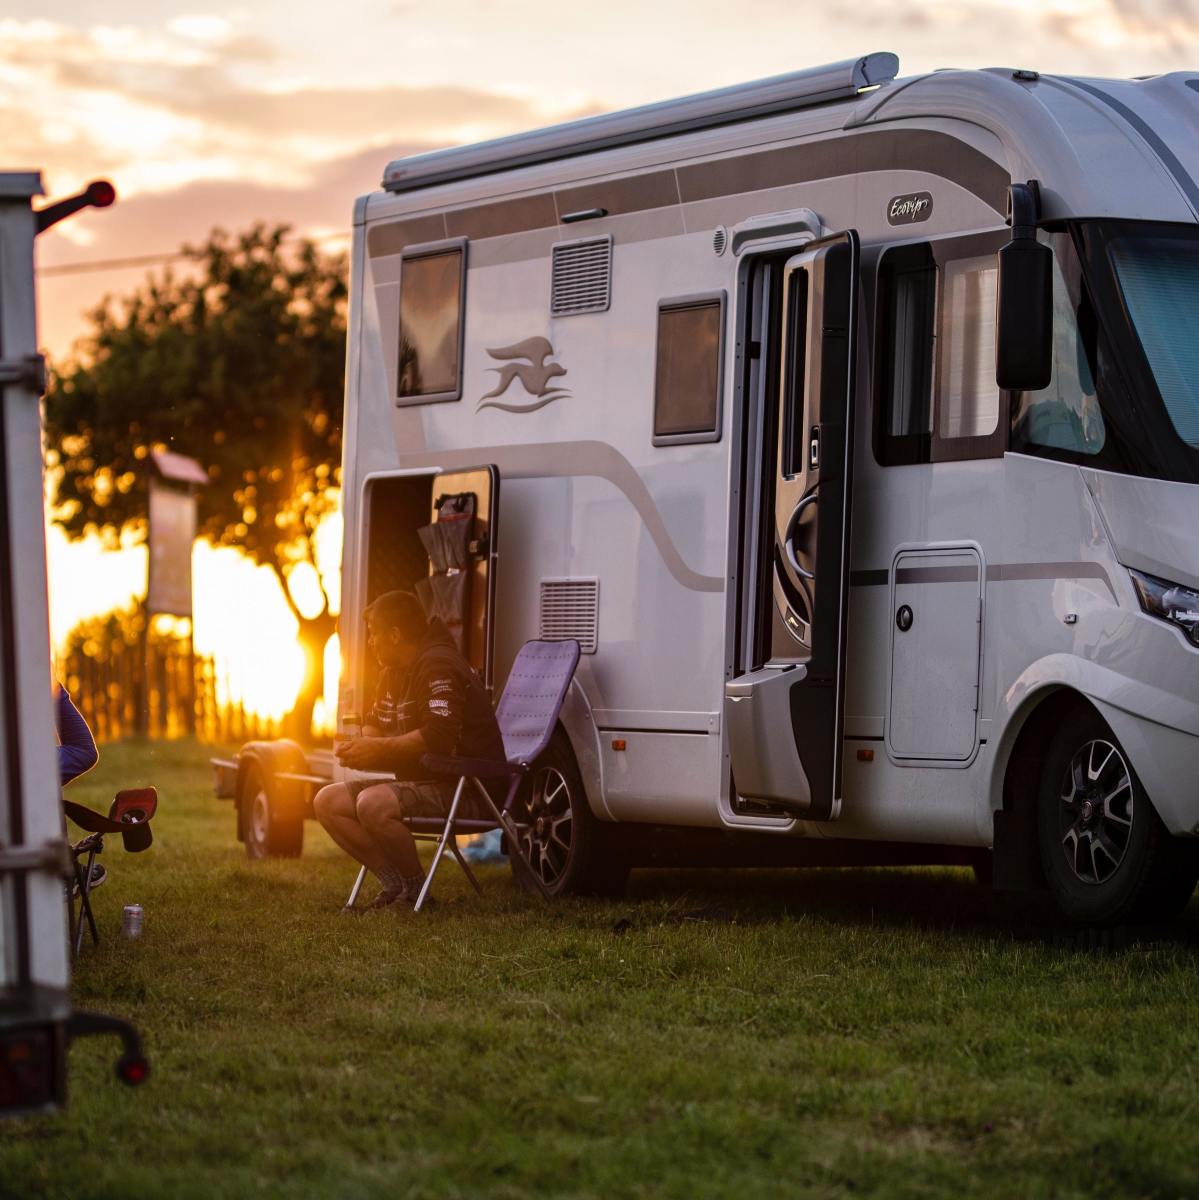 RV camping costs can add up quickly if you aren't careful. Here are some tips to help you get the most for your money. 